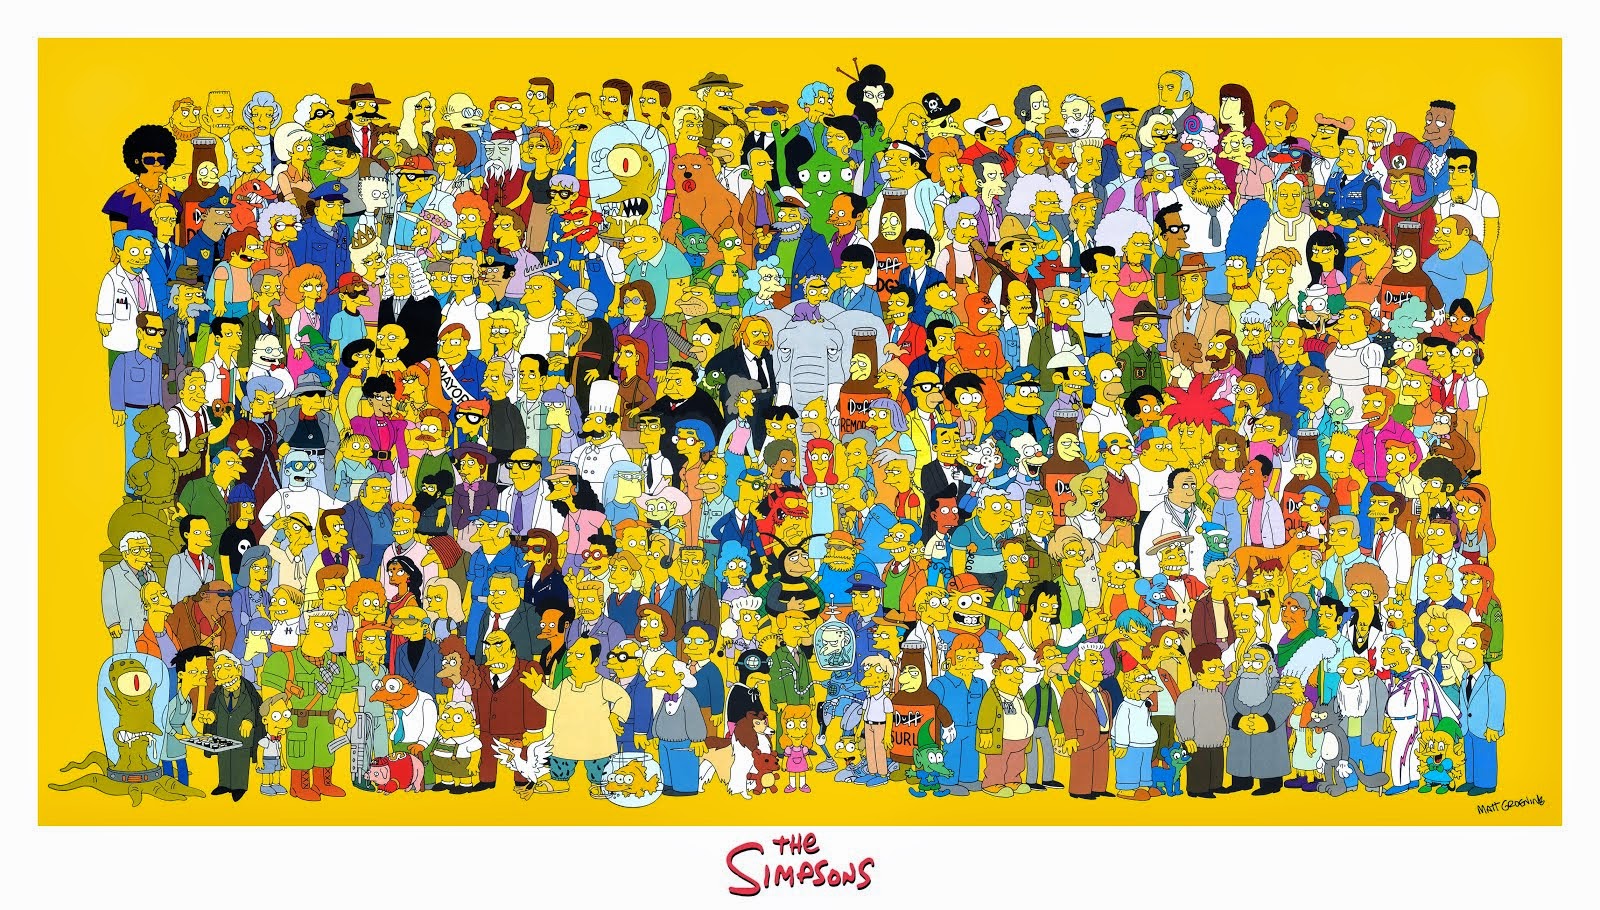 The Simpsons Cast Poster (Simpsons Wikia, 2015)